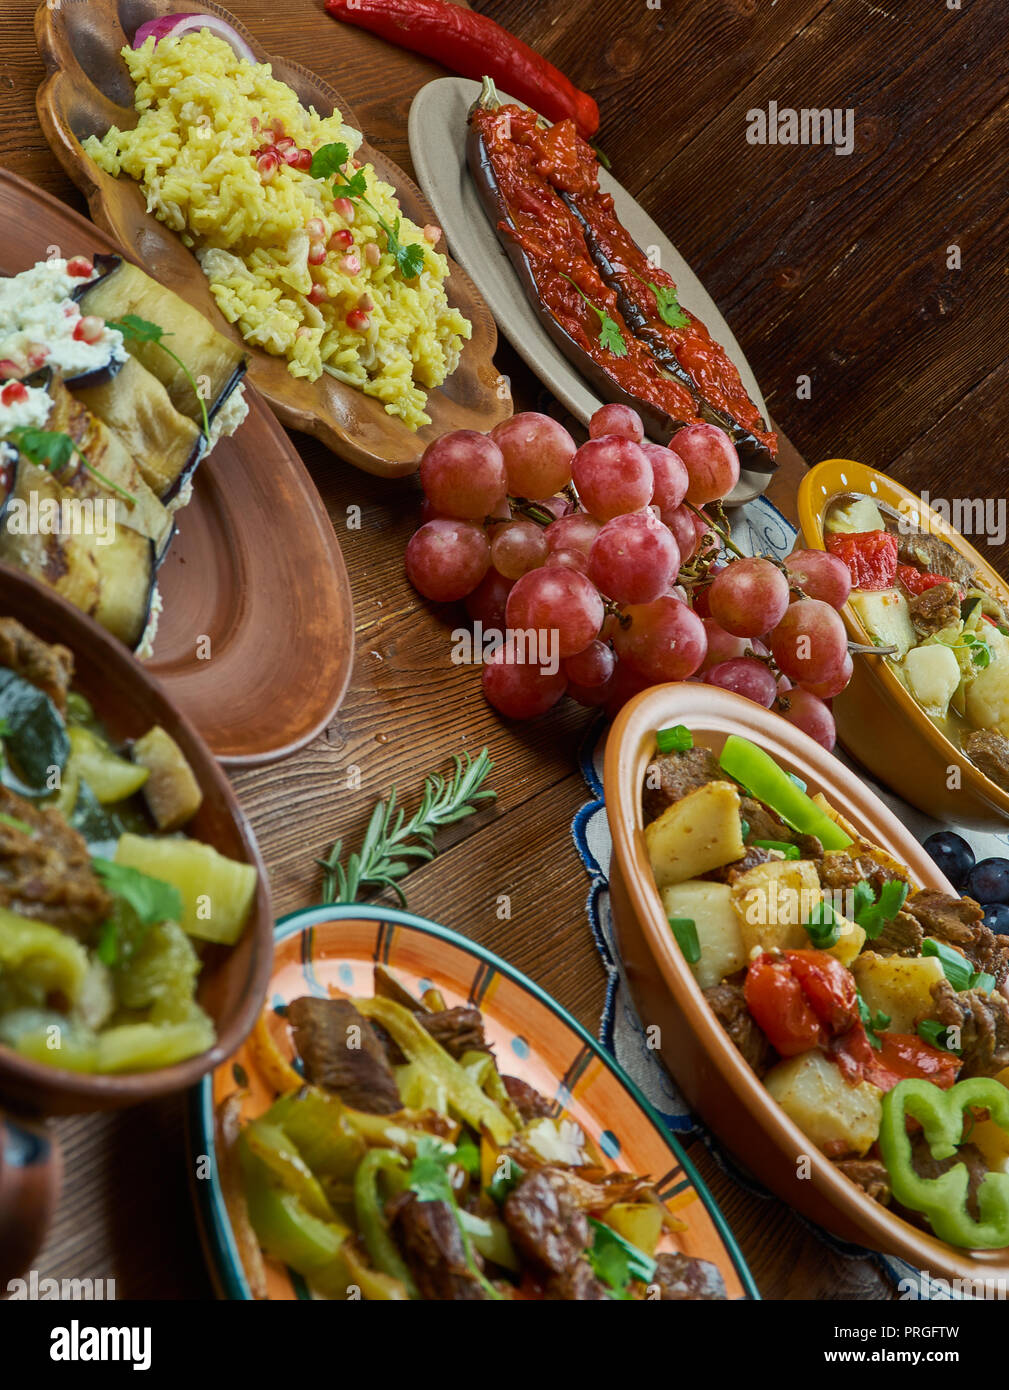 Armenian cuisine, Traditional assorted dishes, Top view. Stock Photo